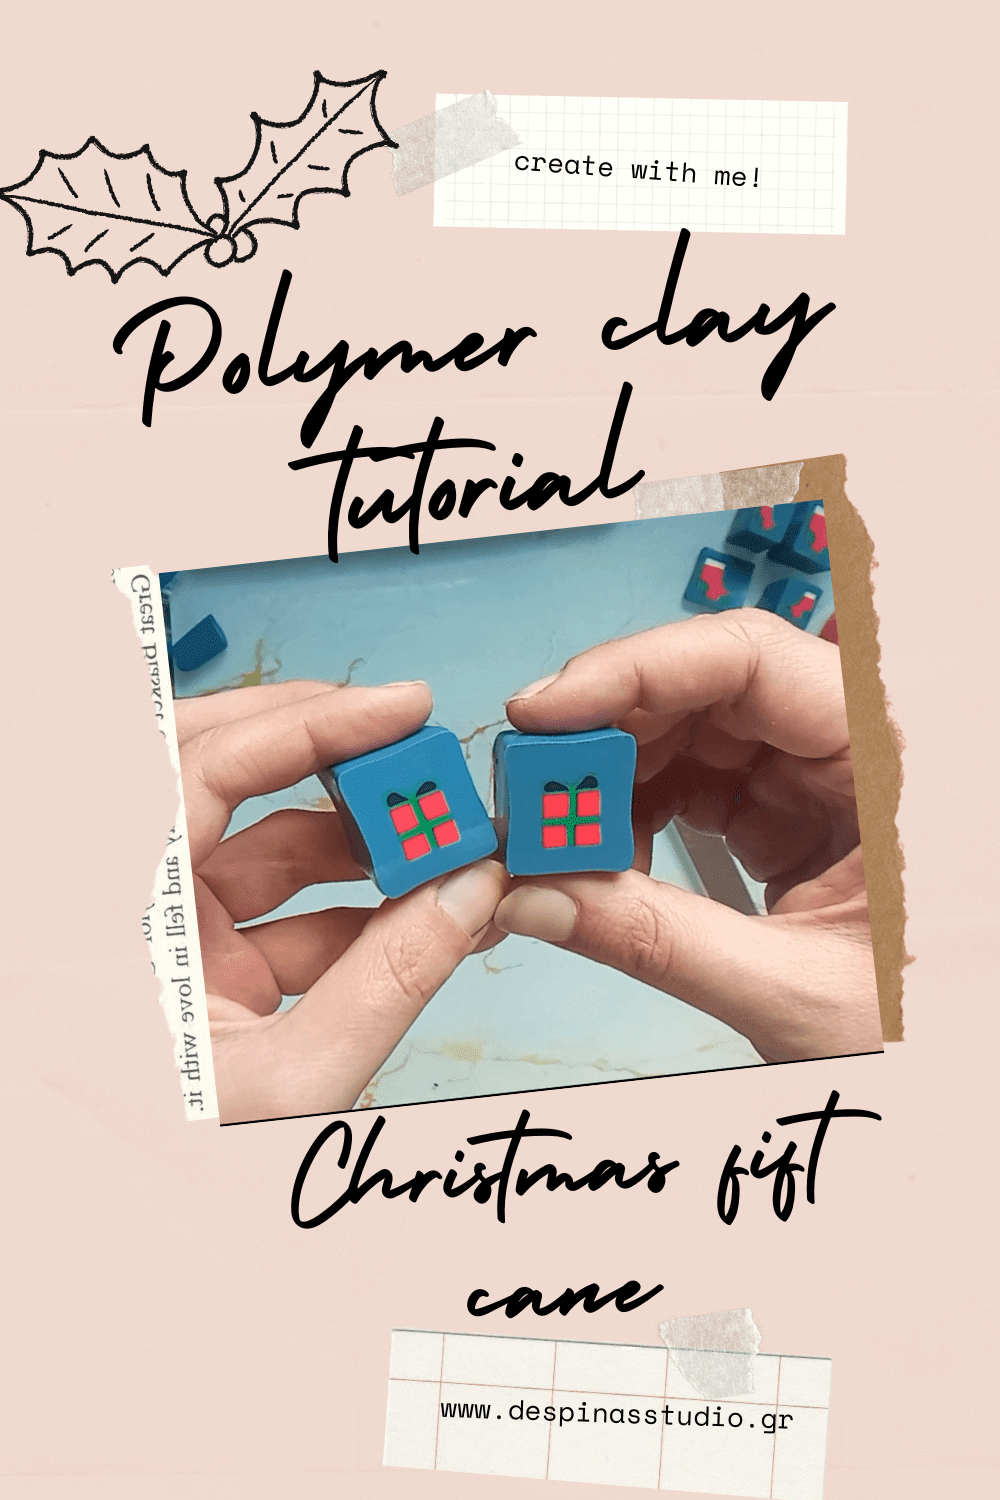 Polymer clay tutorial Christmas gift cane